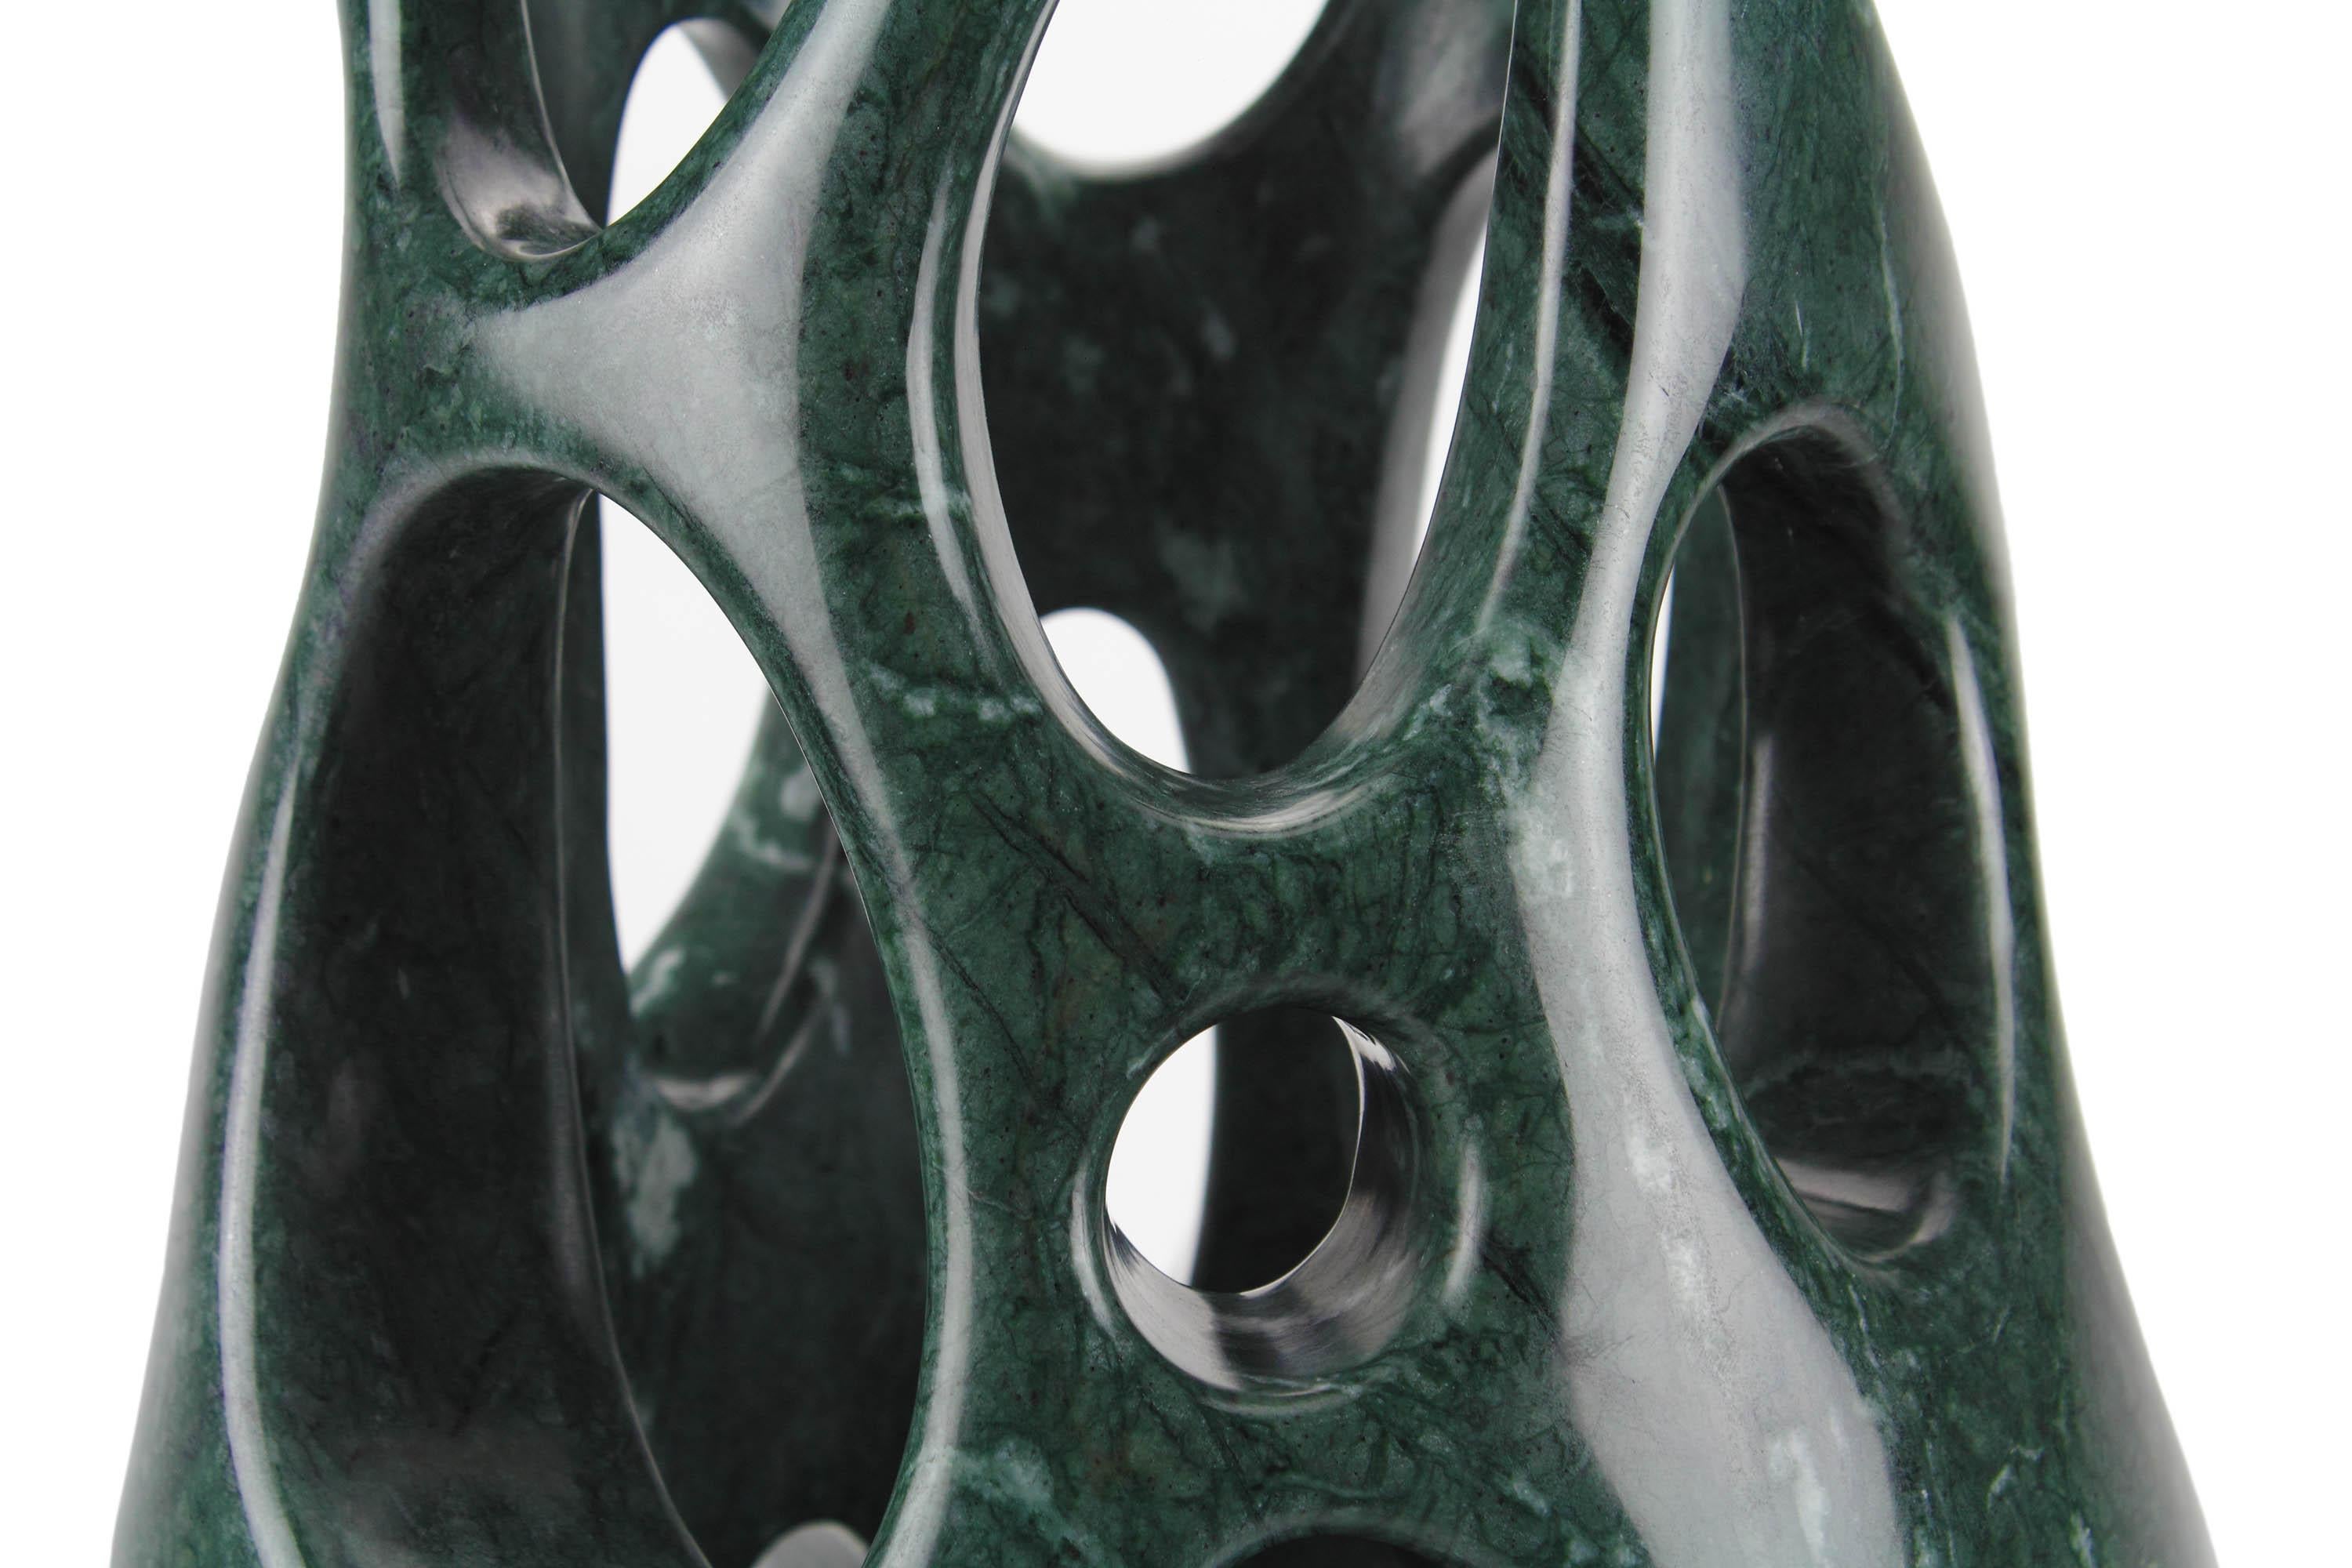 Vase Vessel Sculpture Organic Shape Solid Imperial Green Marble Handmade Italy In New Condition For Sale In Ancona, Marche